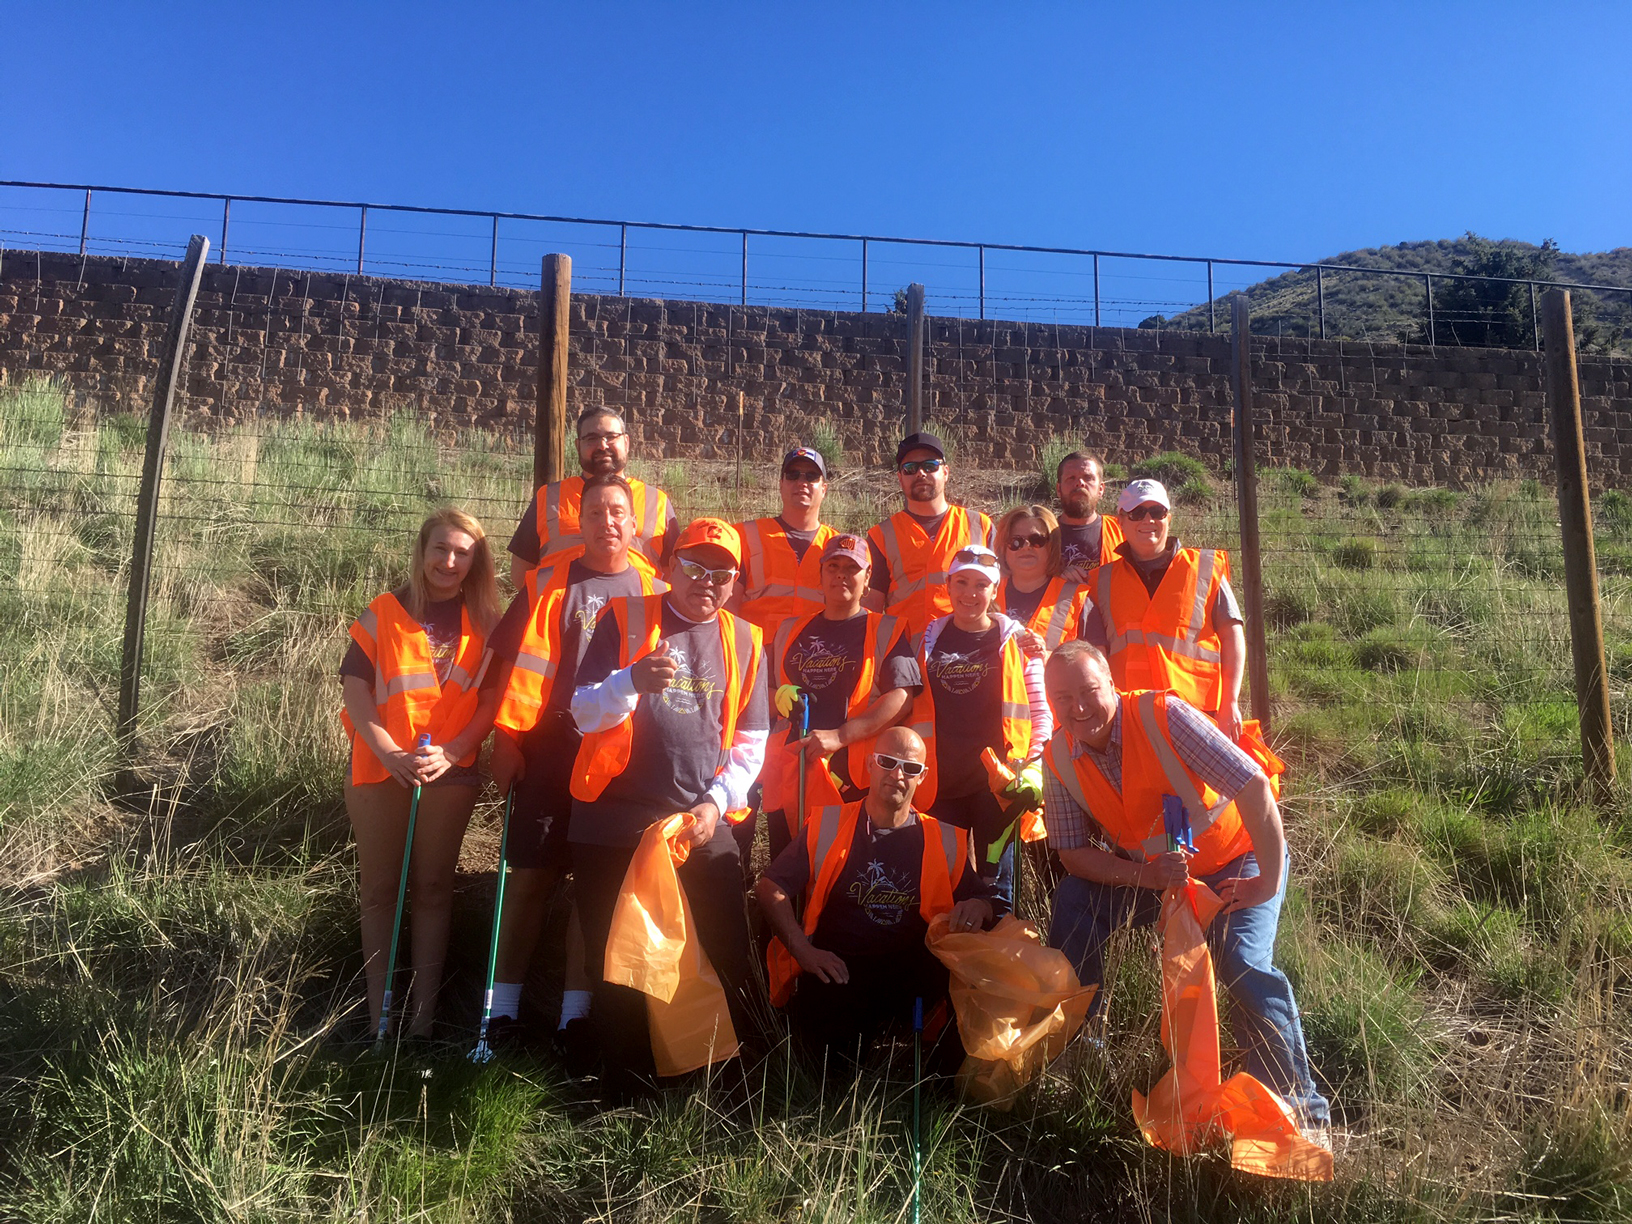 Group of associates in orange safety vests posing for a picture after a roadside clean-up event